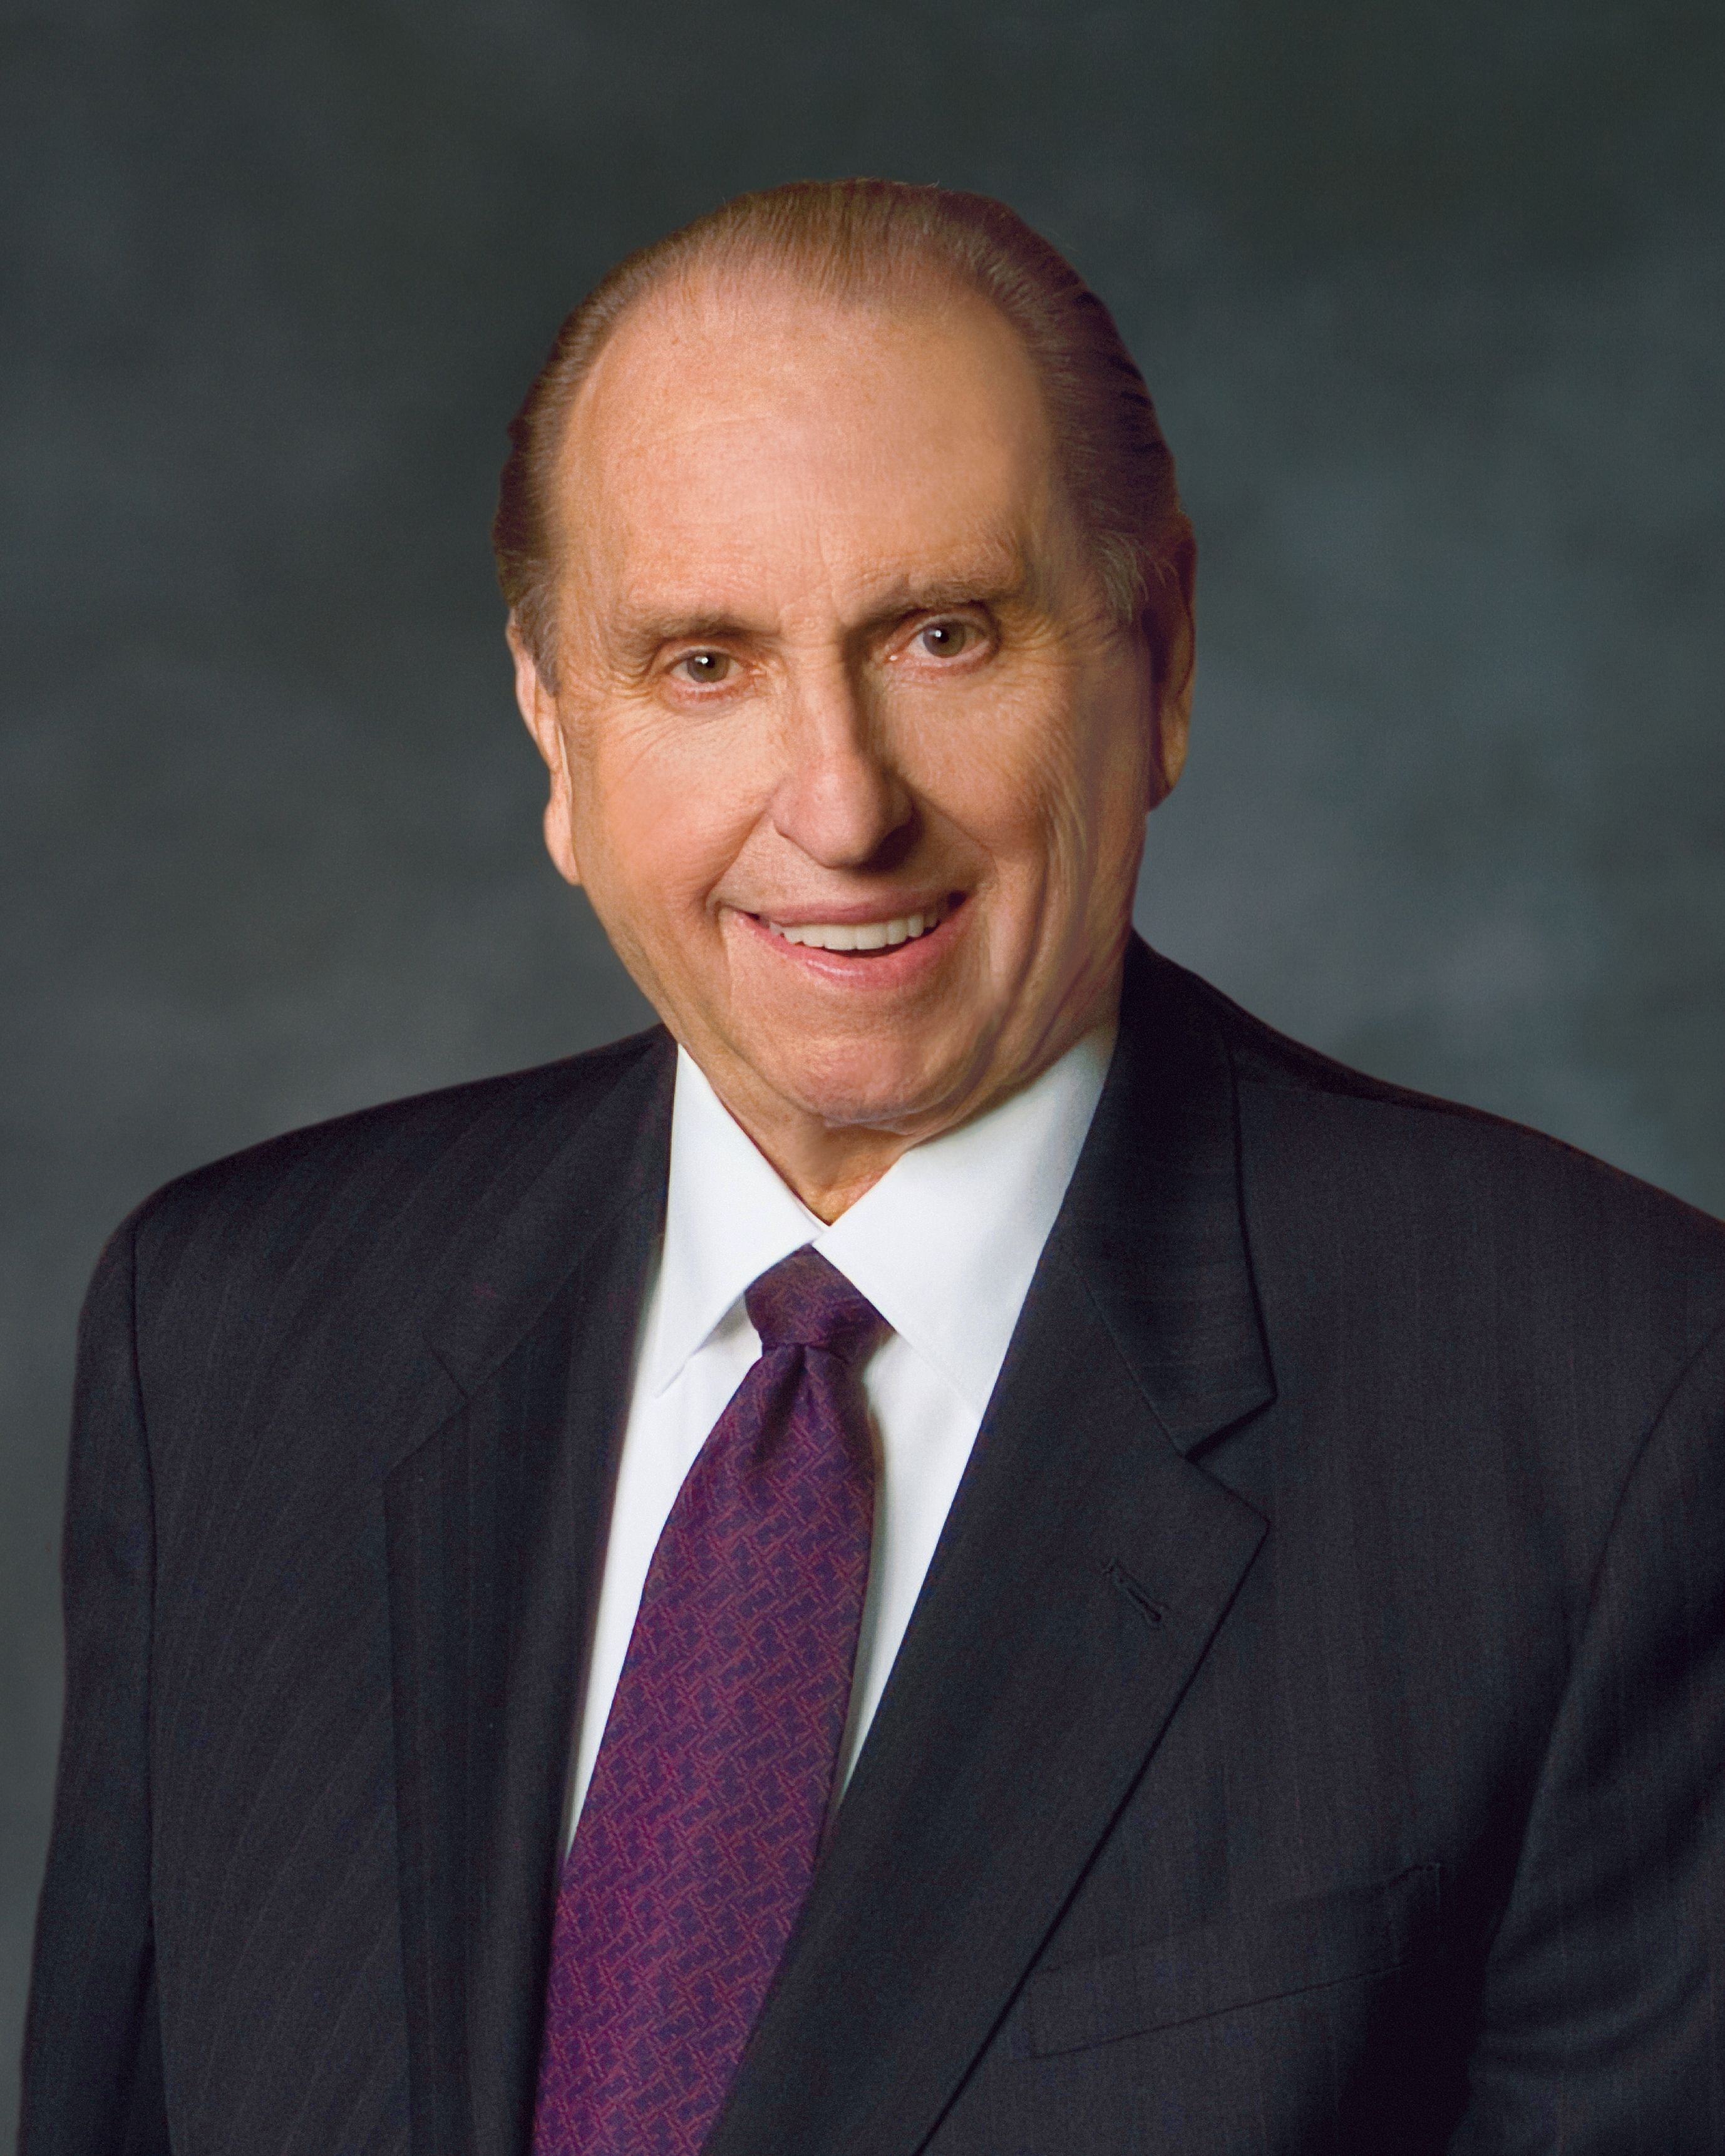 A formal portrait of President Thomas S. Monson, who is wearing a black suit and a purple tie, in front of a blue background.